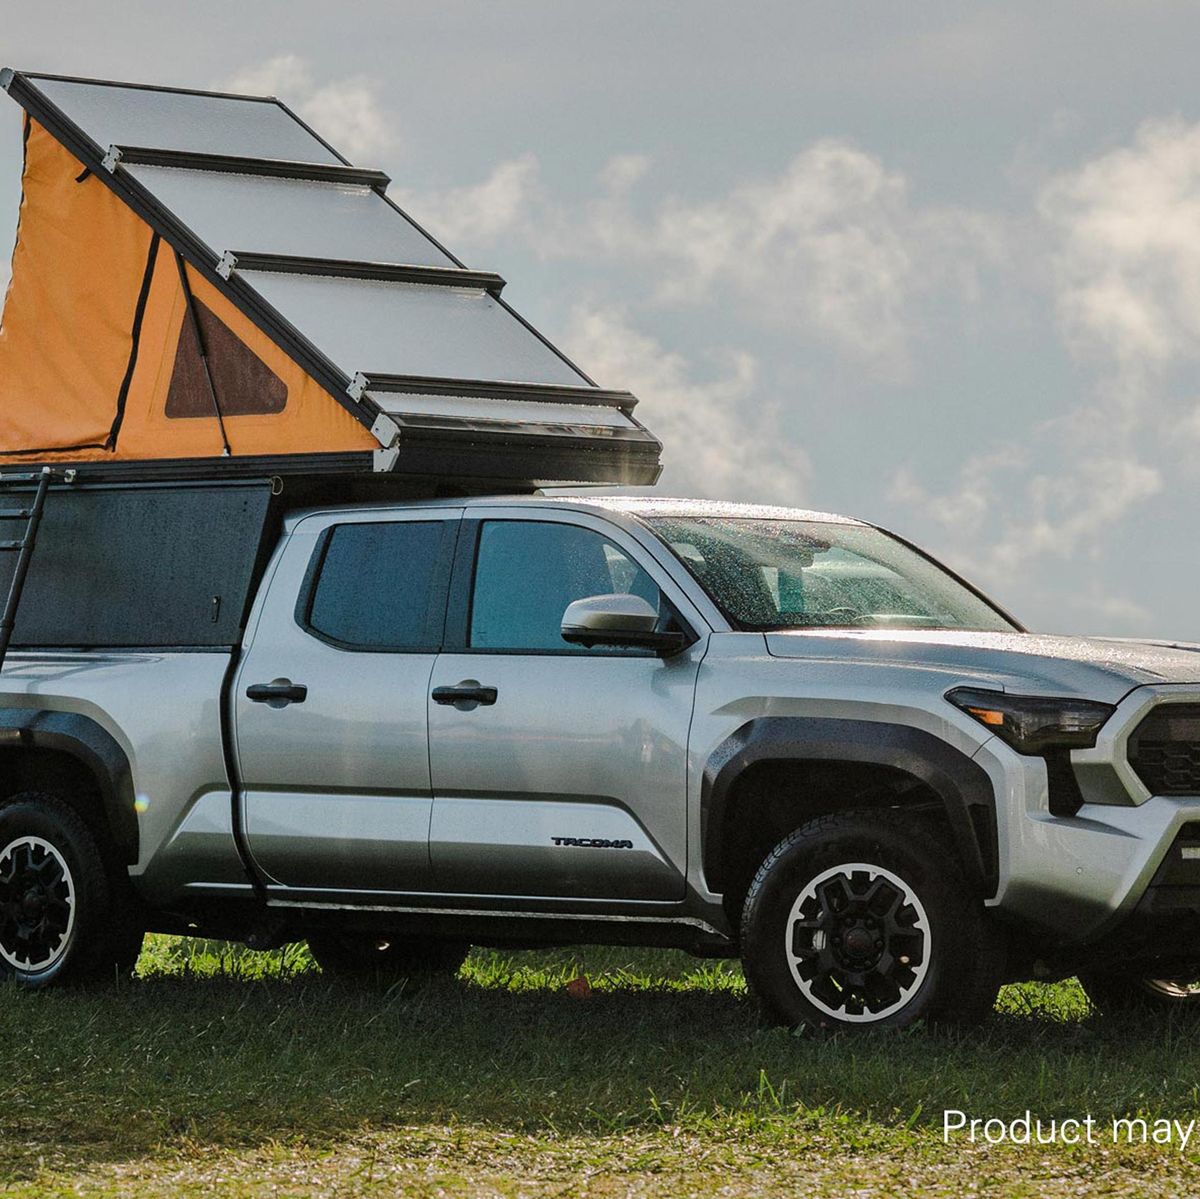 There's Already a Sick Camper Option For the New Toyota Tacoma